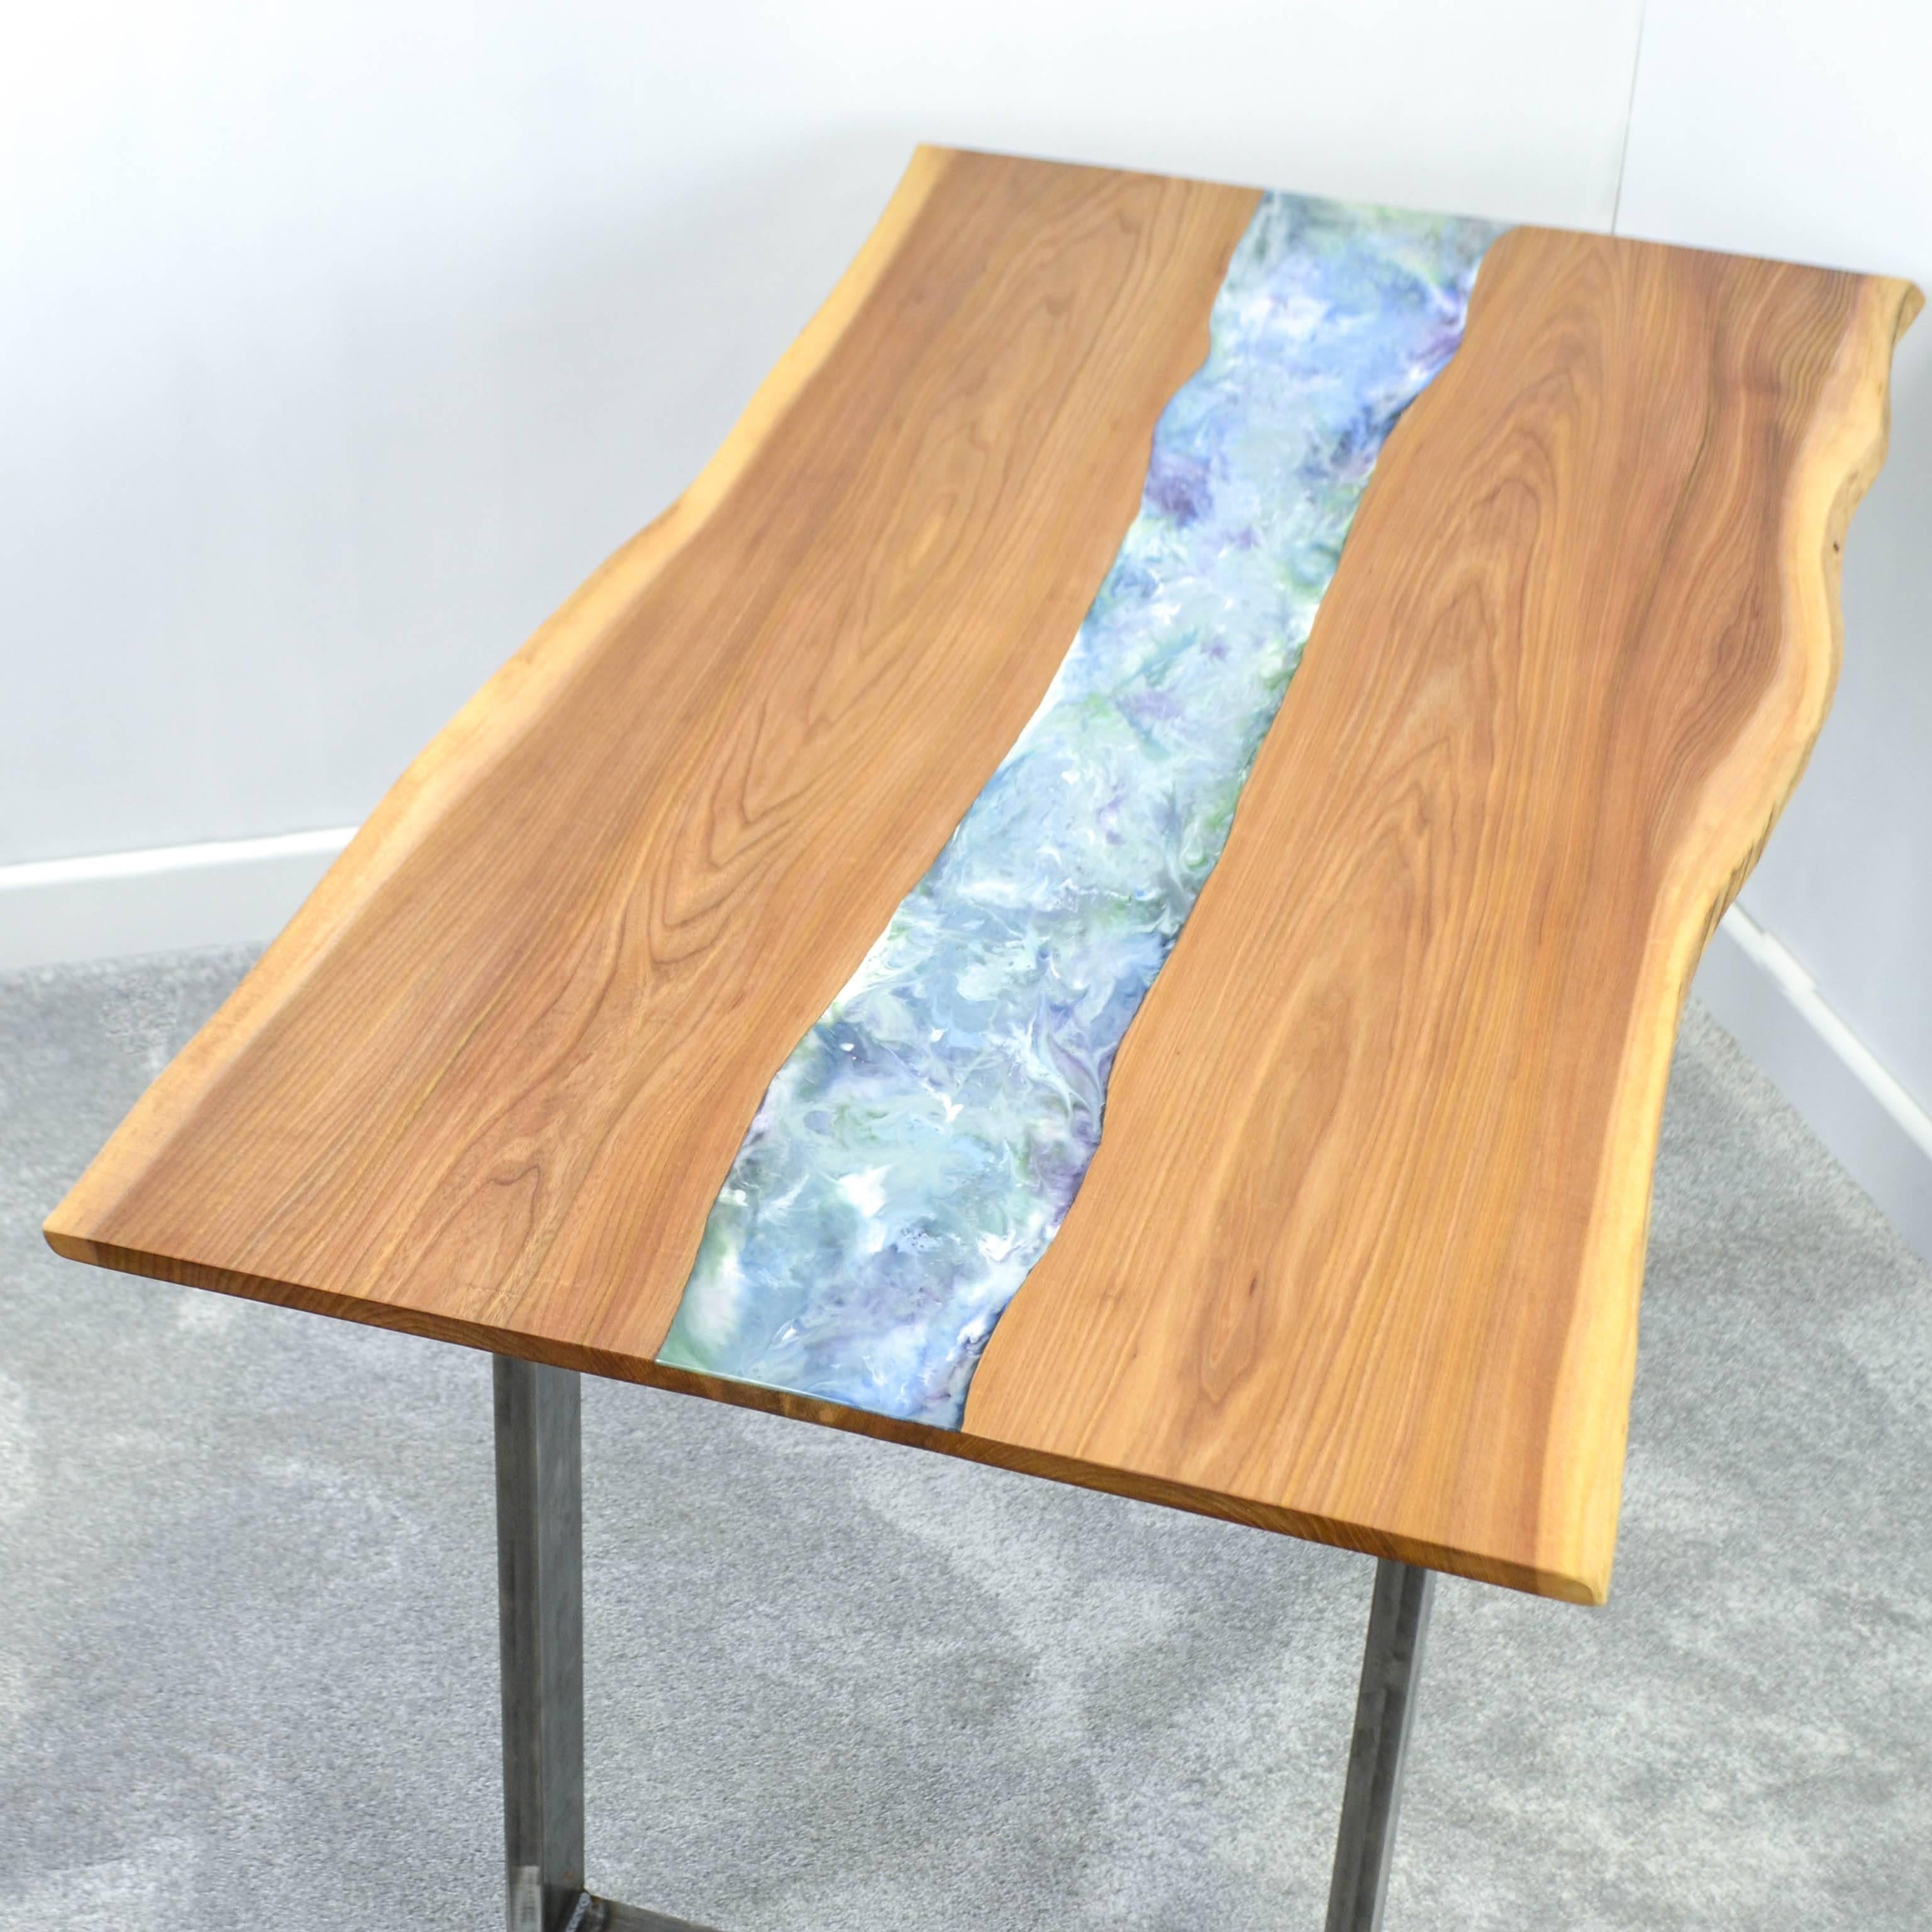 Organic Modern Live Edge Elm Resin Art Dining Table In Excellent Condition For Sale In London, GB